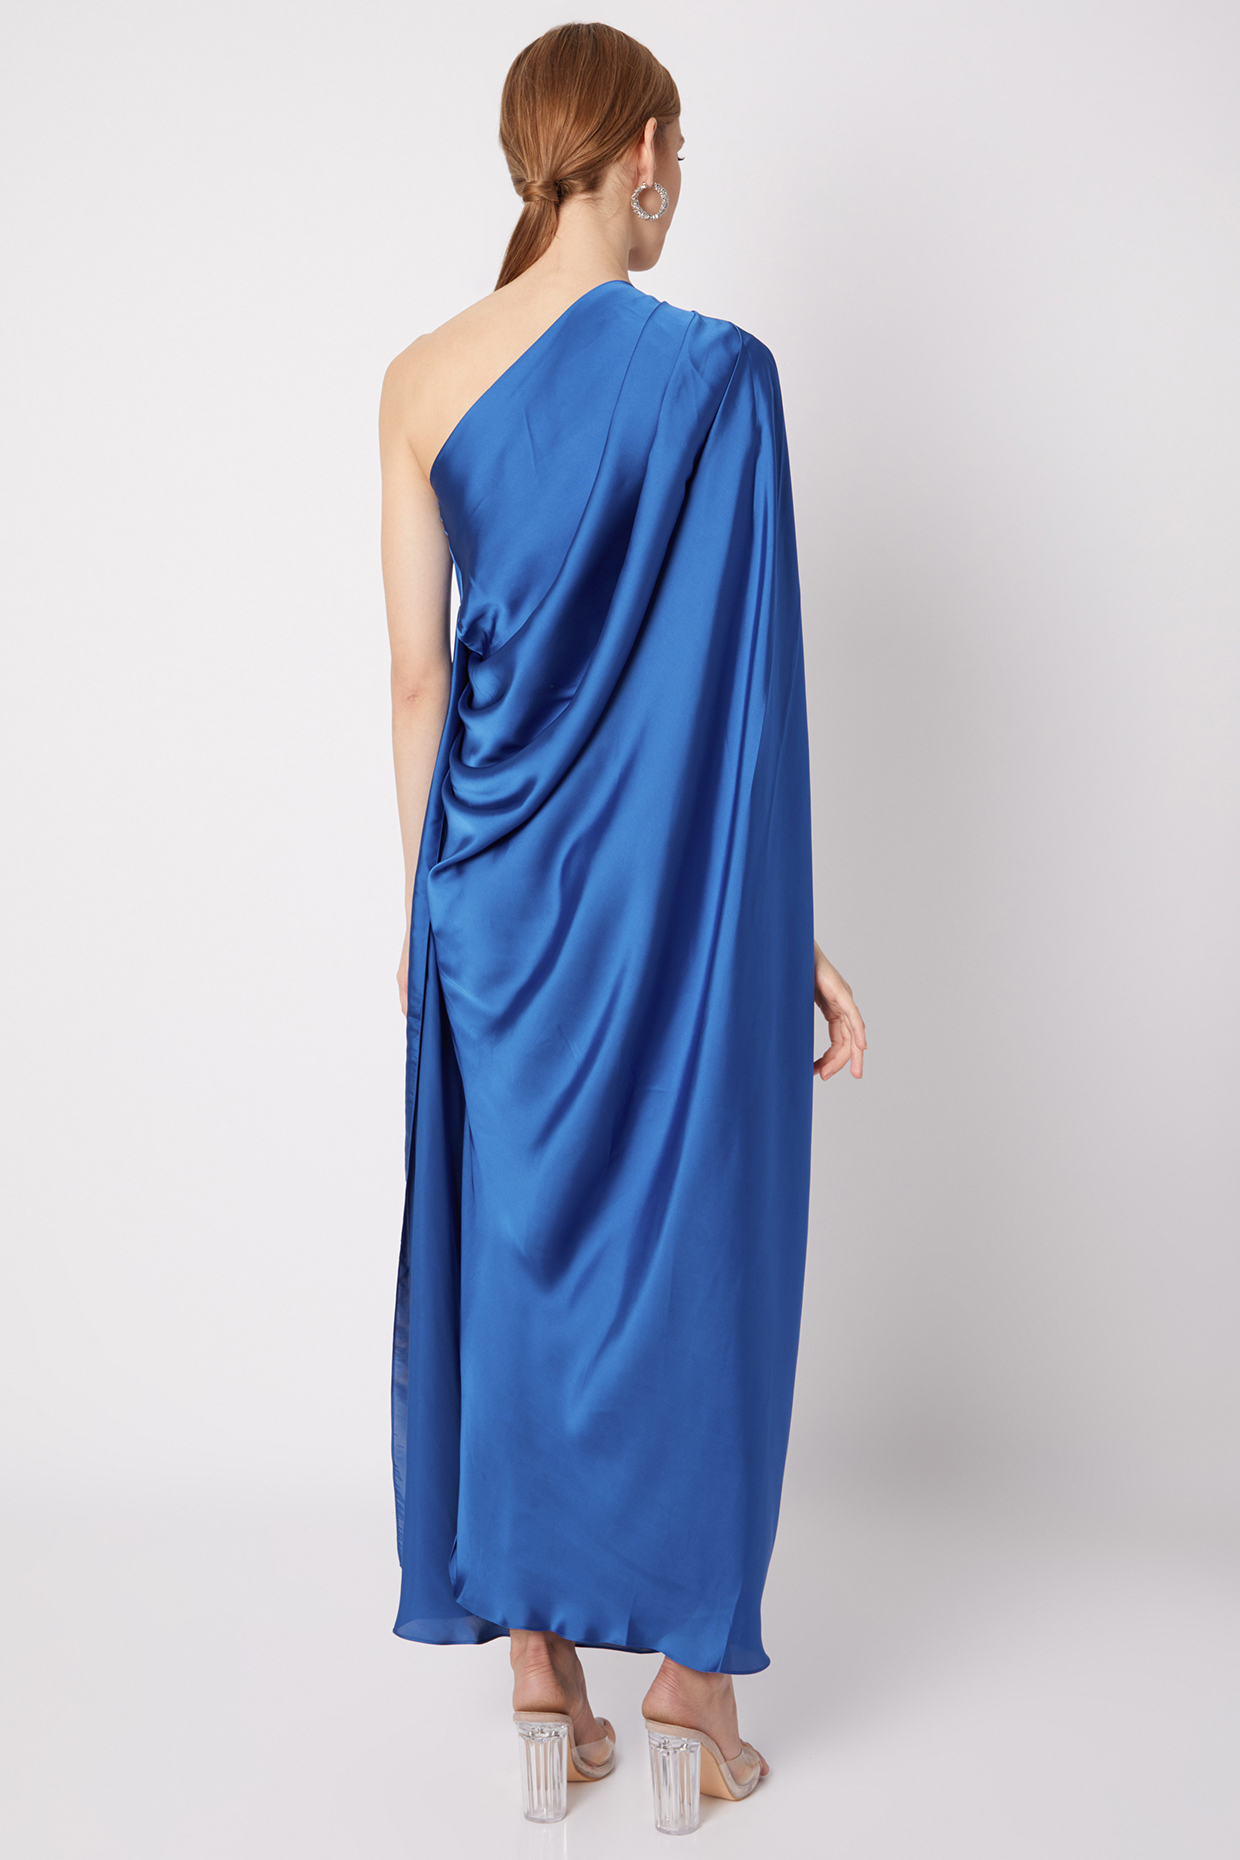 Electric Blue Draped Gown